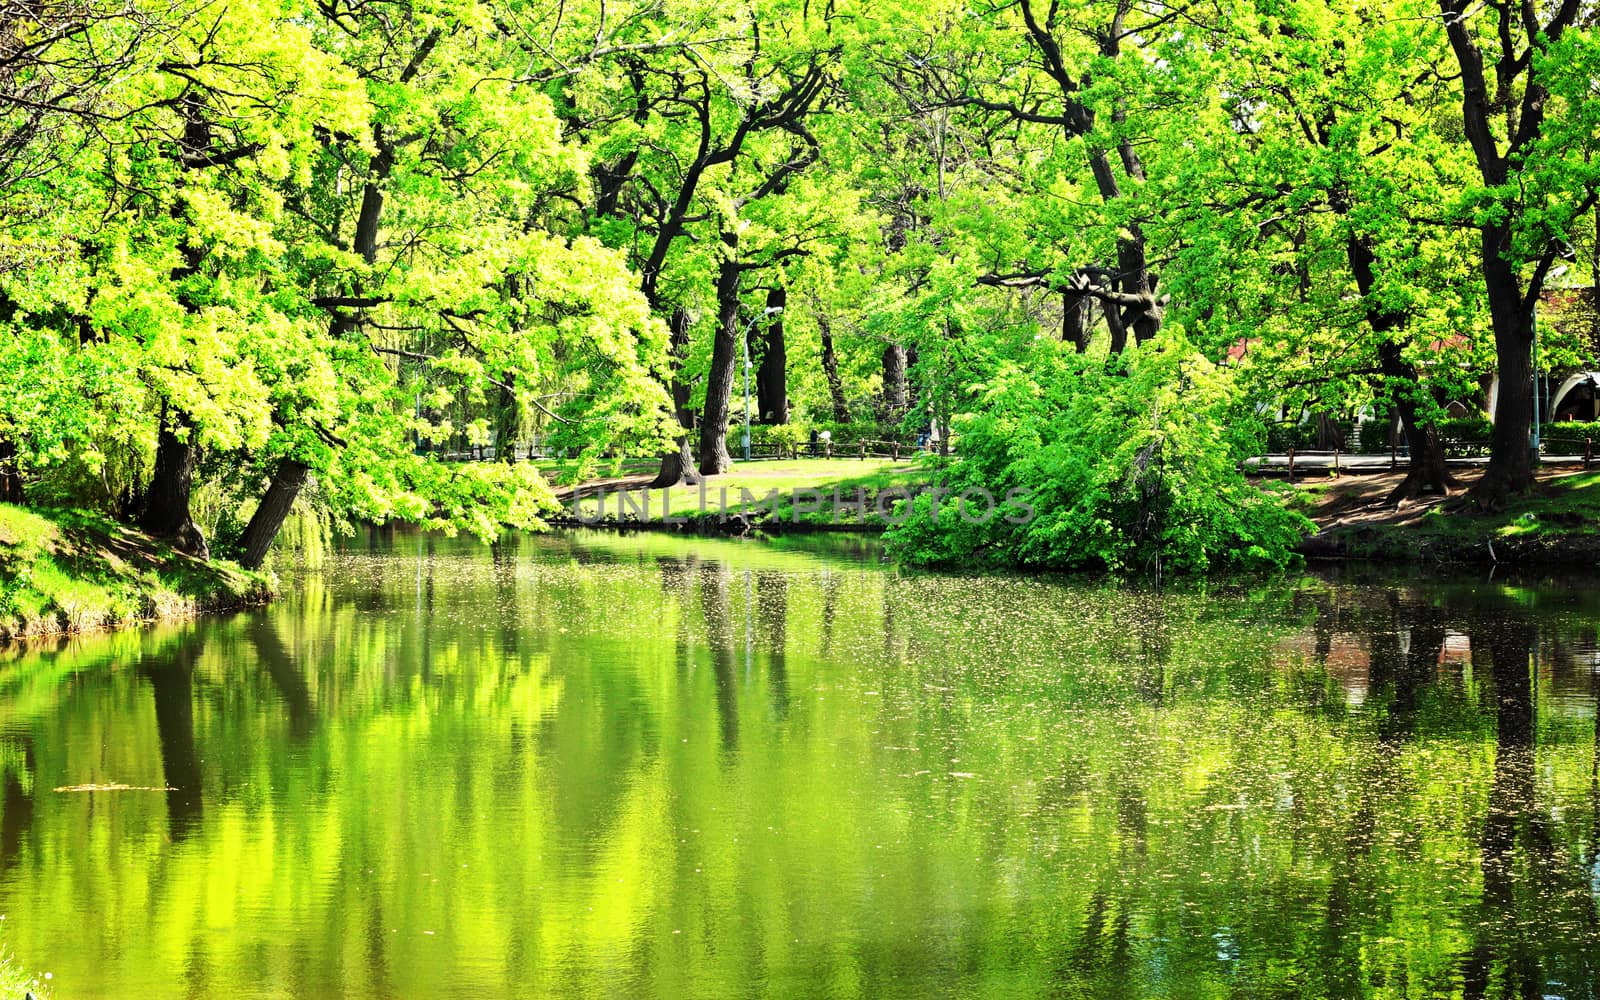 View of a small lake in the city park in the spring.